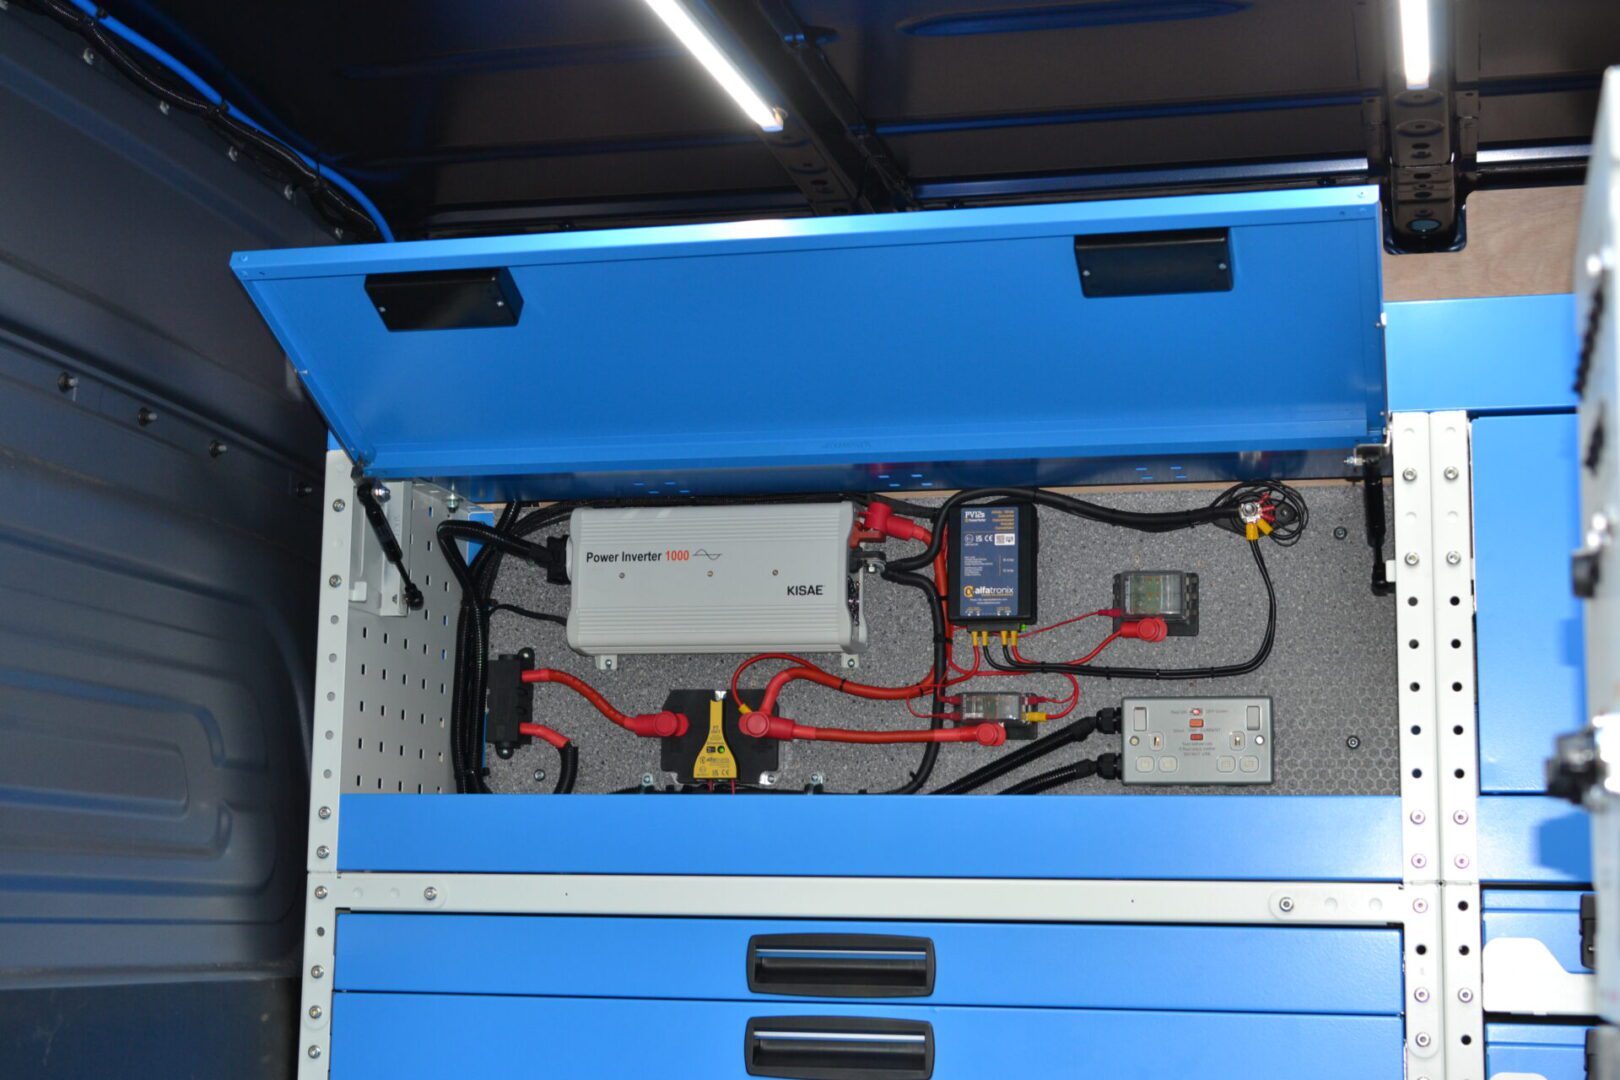 Kisae 1000w inverter and supporting electrics fitted by Van Racking Solutions